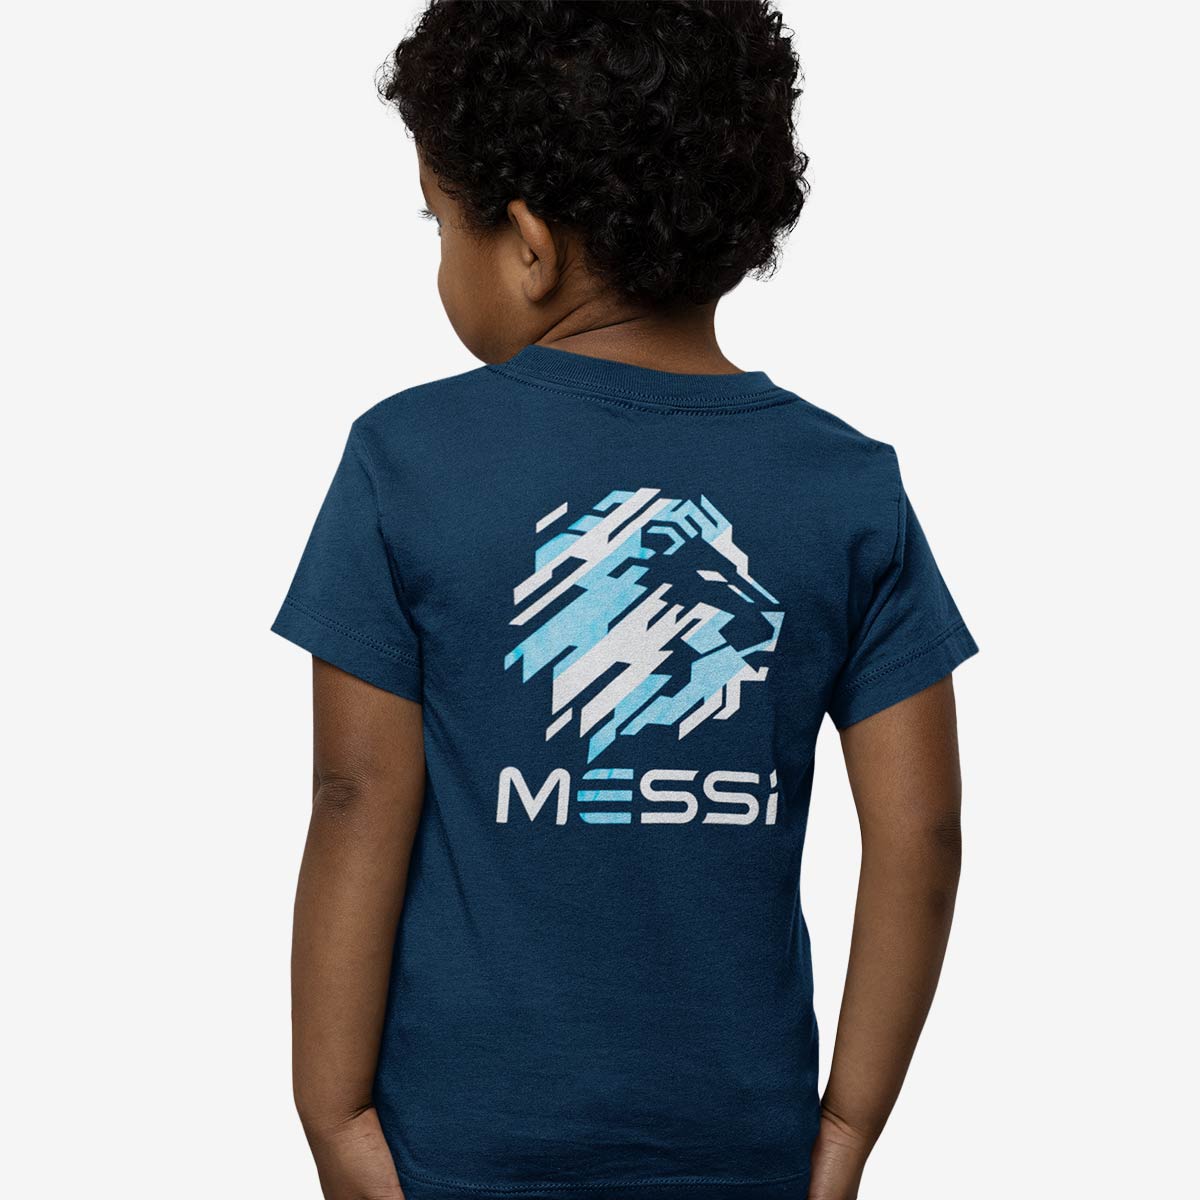 Messi Youth Fit Navy Tee image number 2